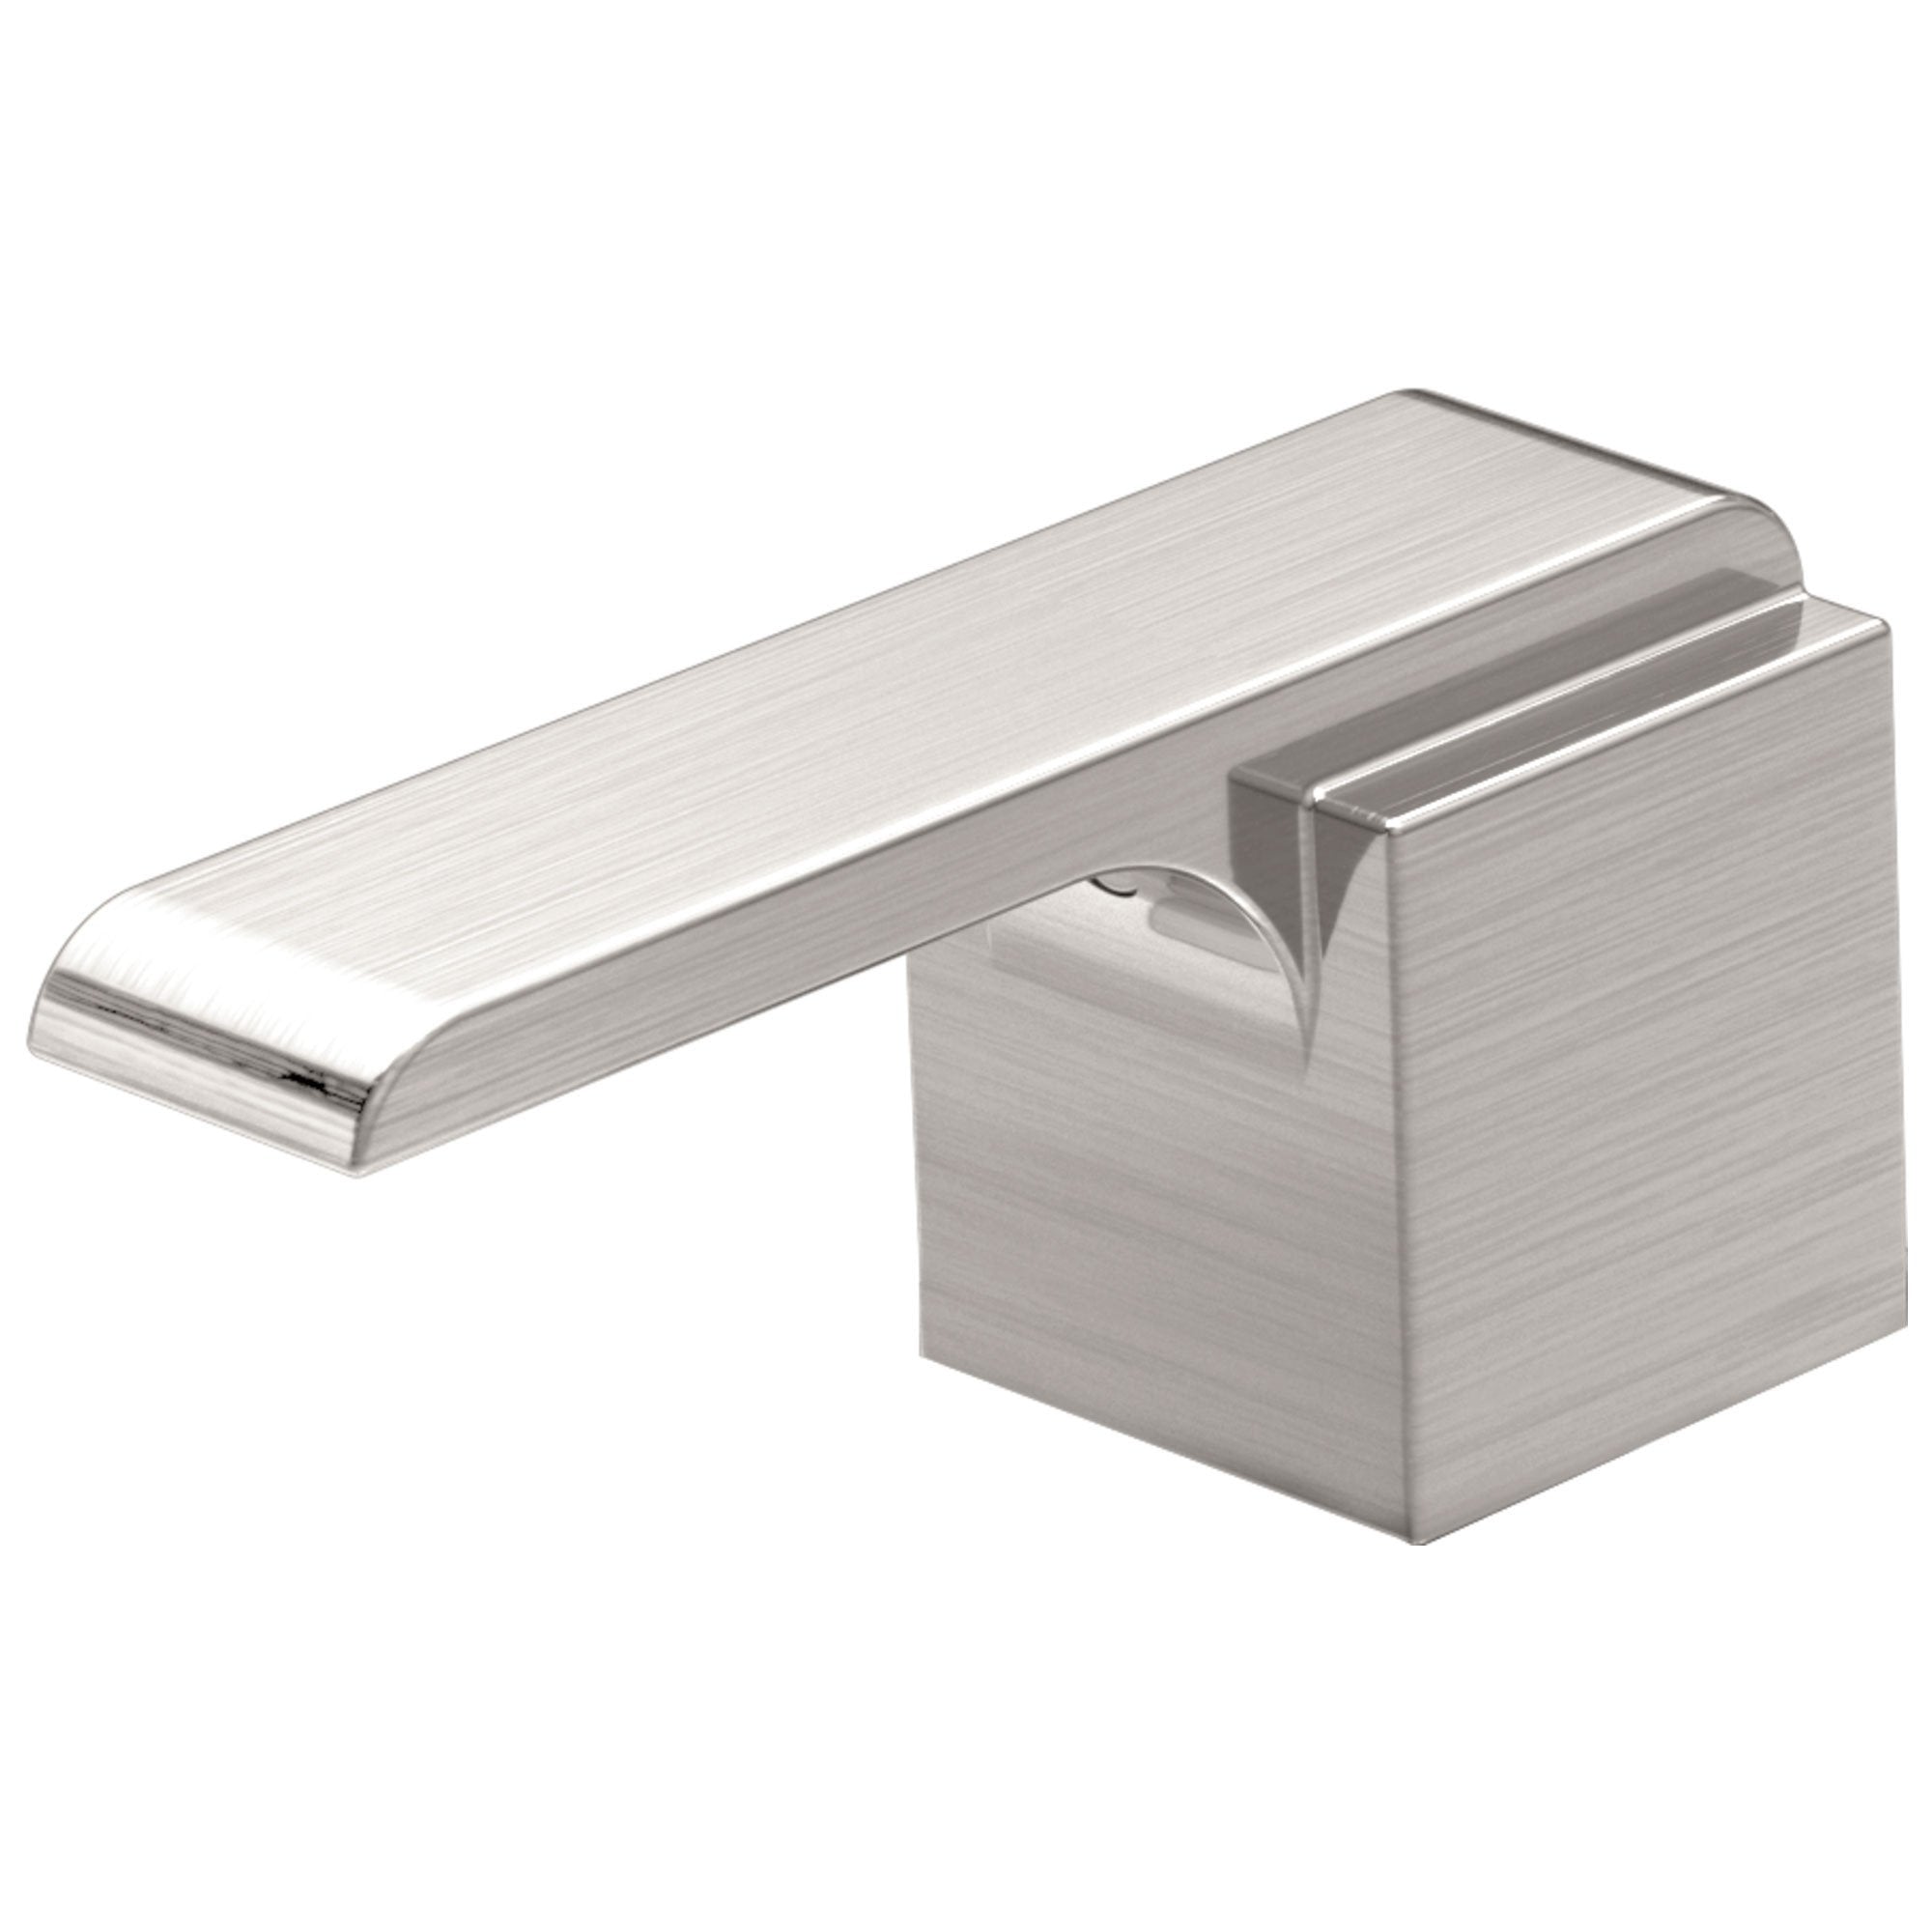 Delta Ara Collection Stainless Steel Finish Lavatory Metal Lever Handles - Quantity 2 Included DH267SS